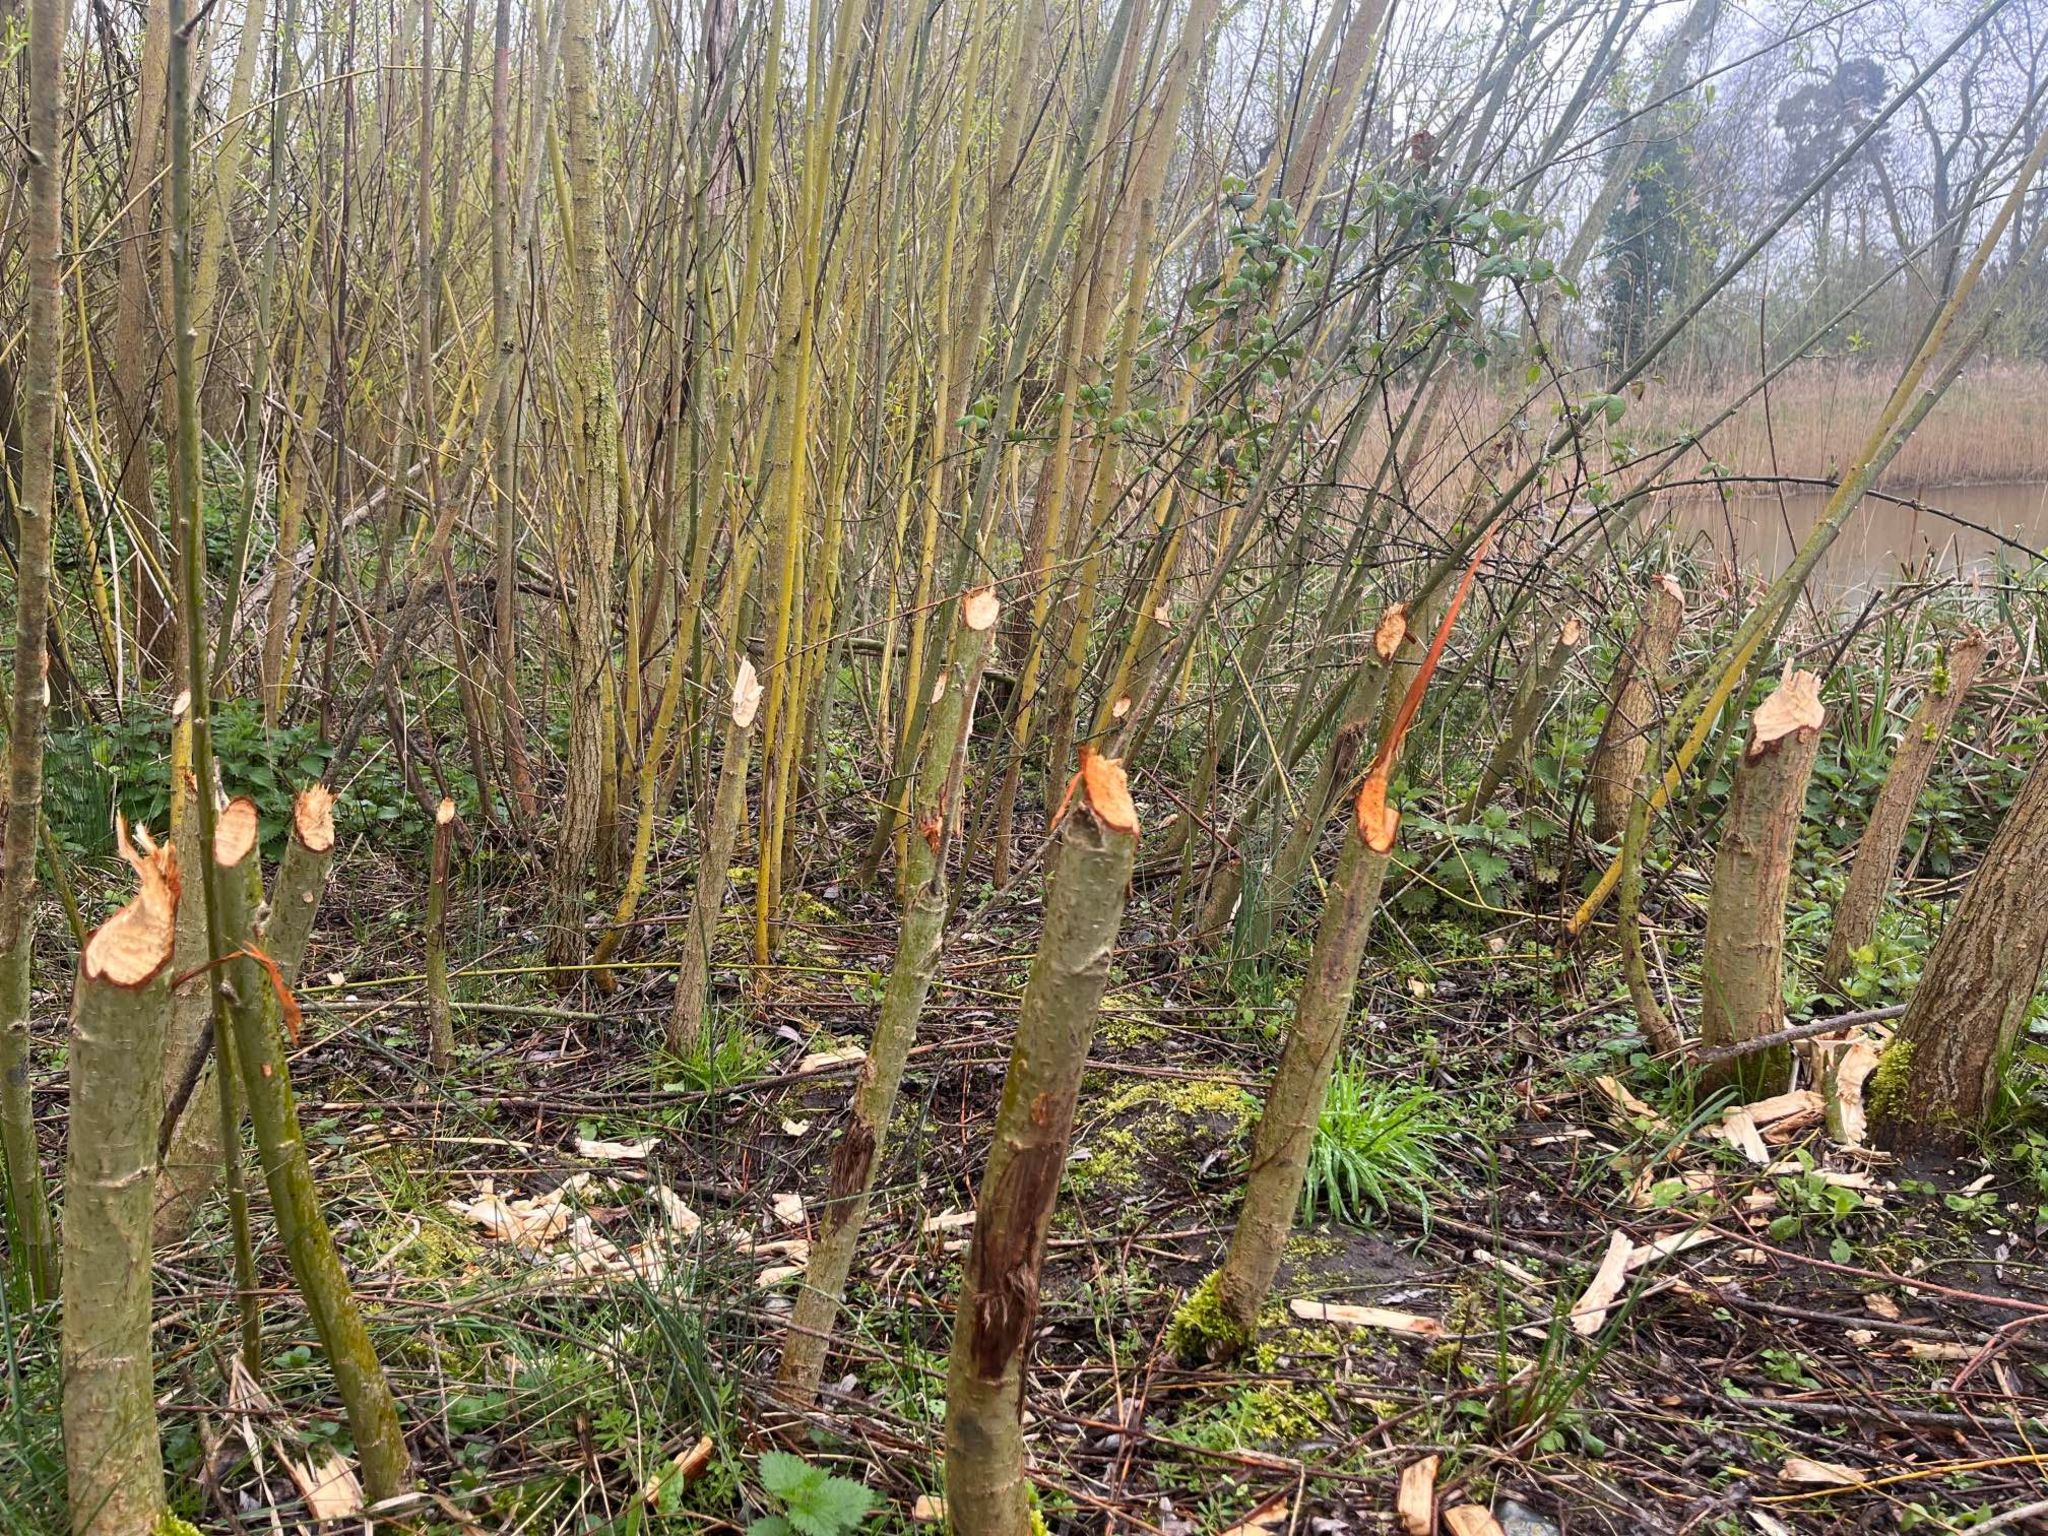 Coppiced willow